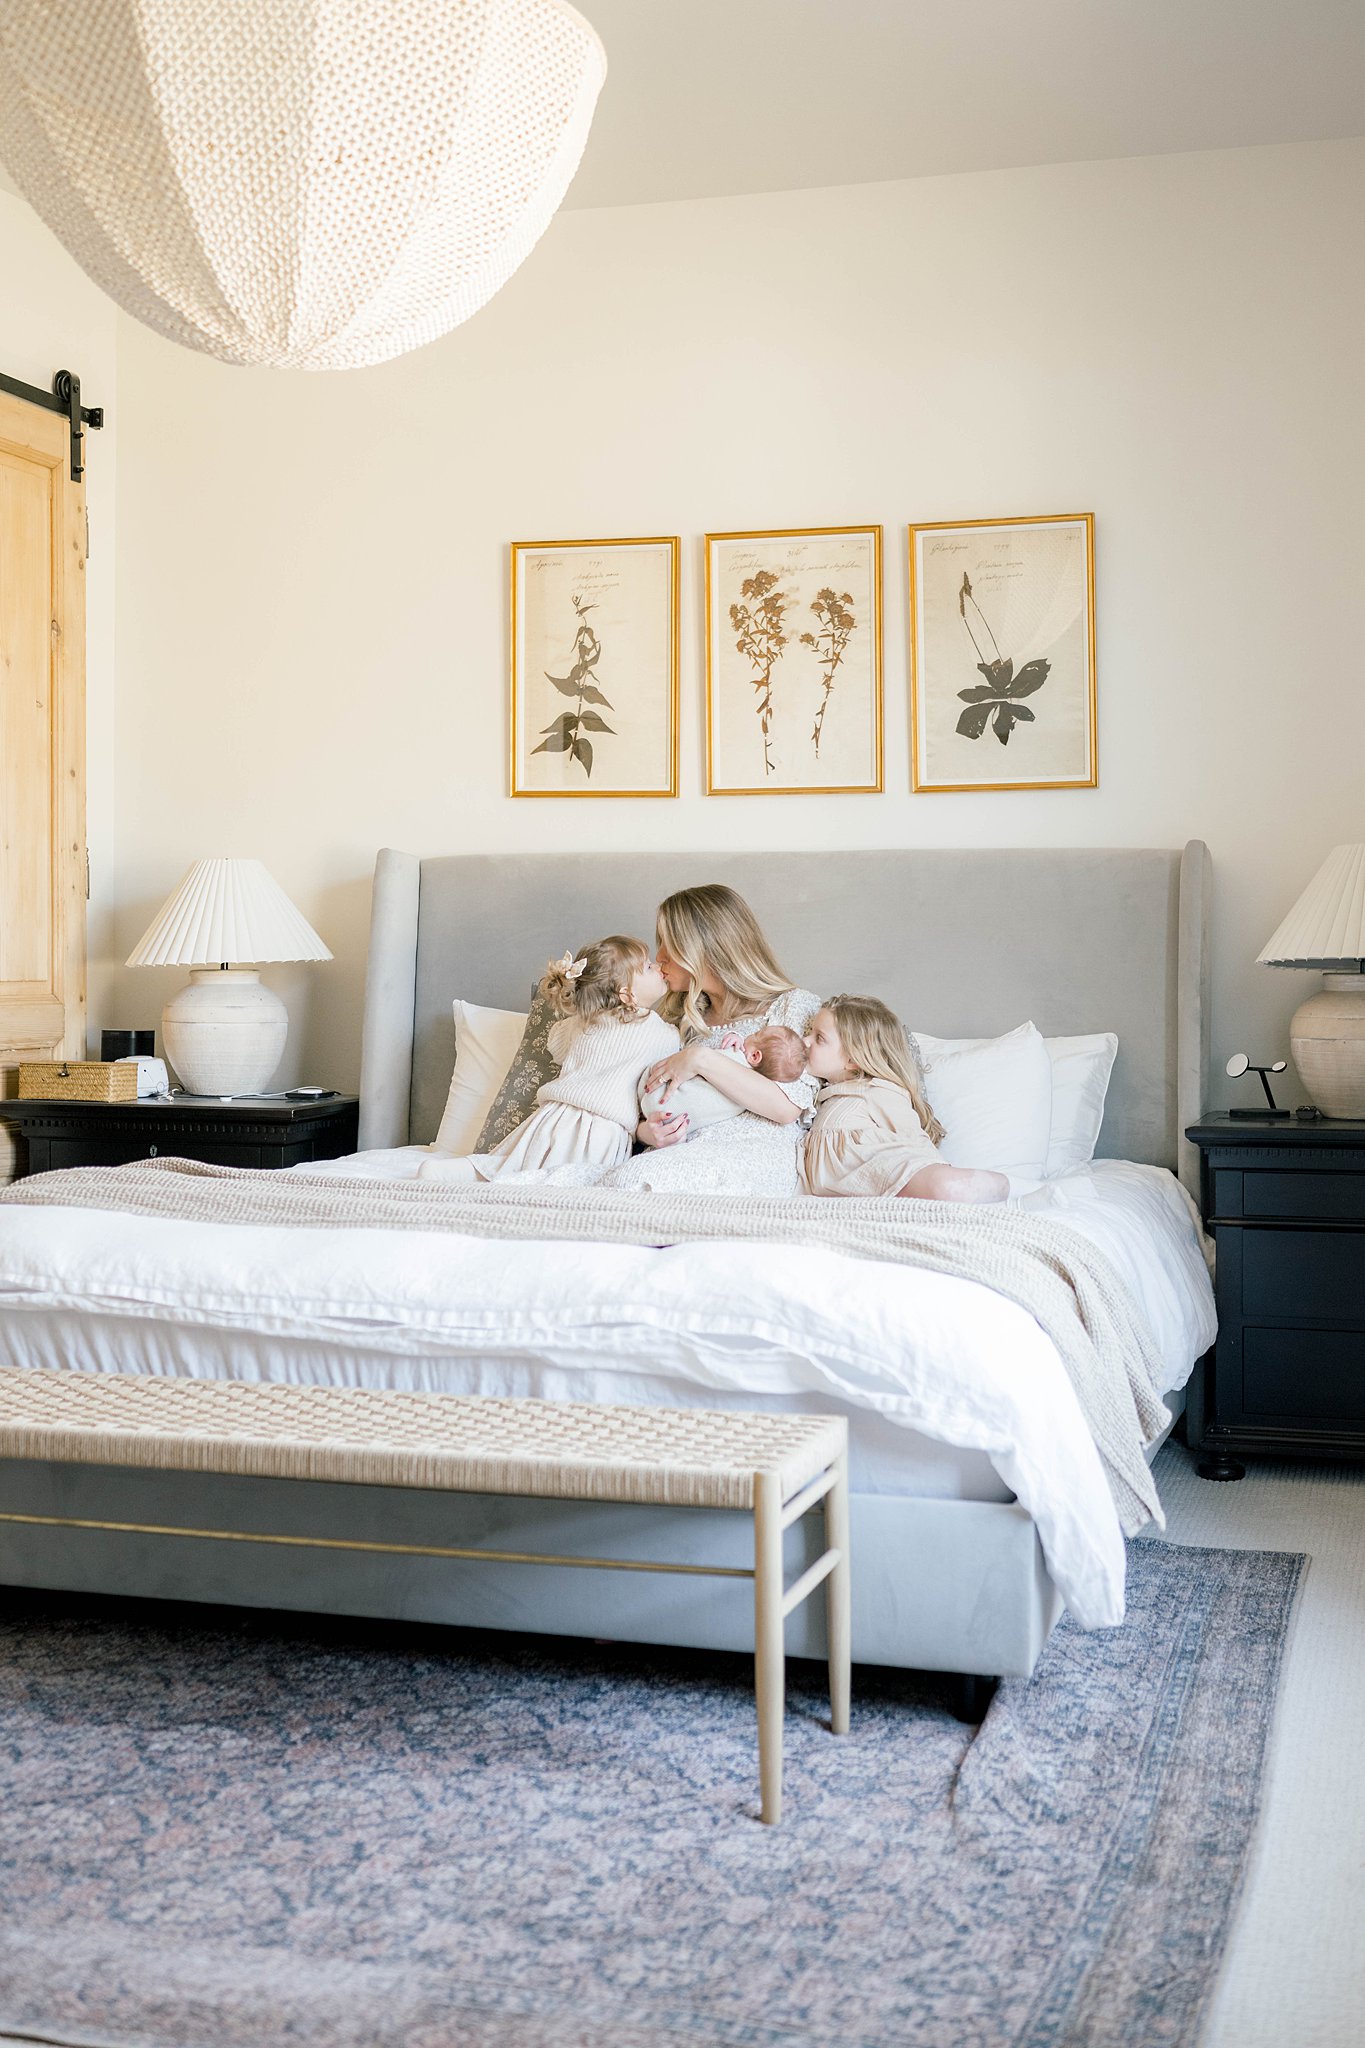 A mother sits on a bed holding her newborn with two daughters kissing one of her daughters with a grey bed and floral paintings above them okc interior design